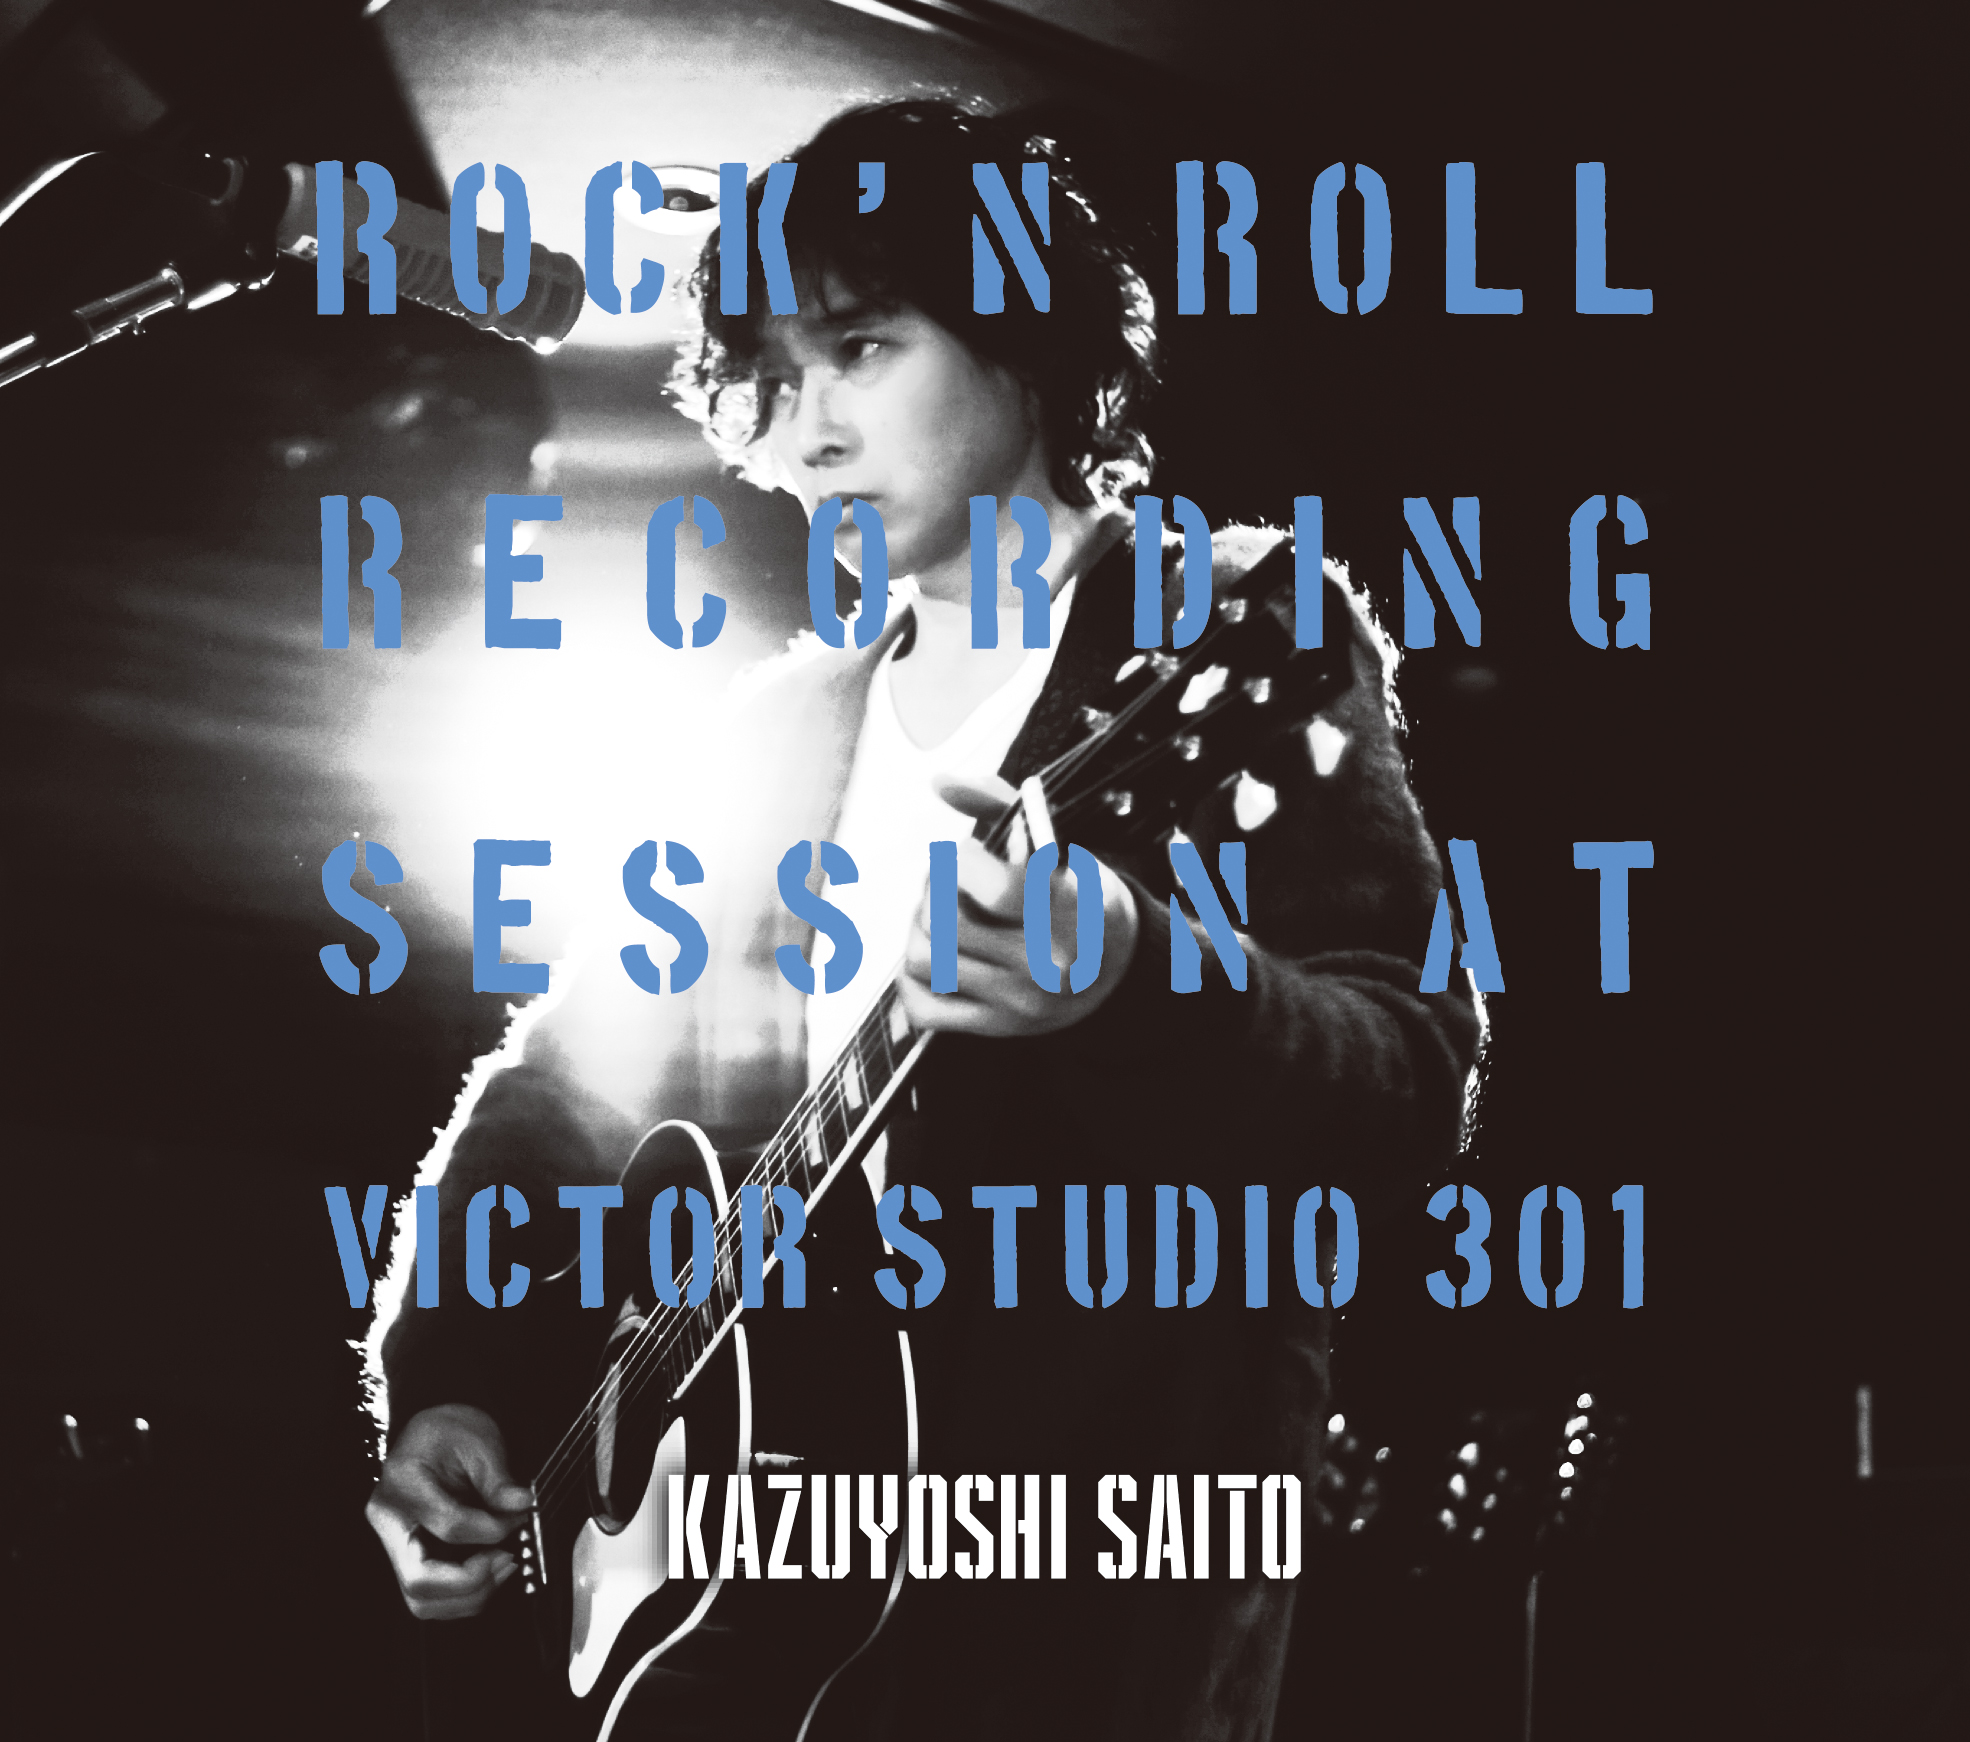 『ROCK’N ROLL Recording Session at Victor Studio 301』jacket